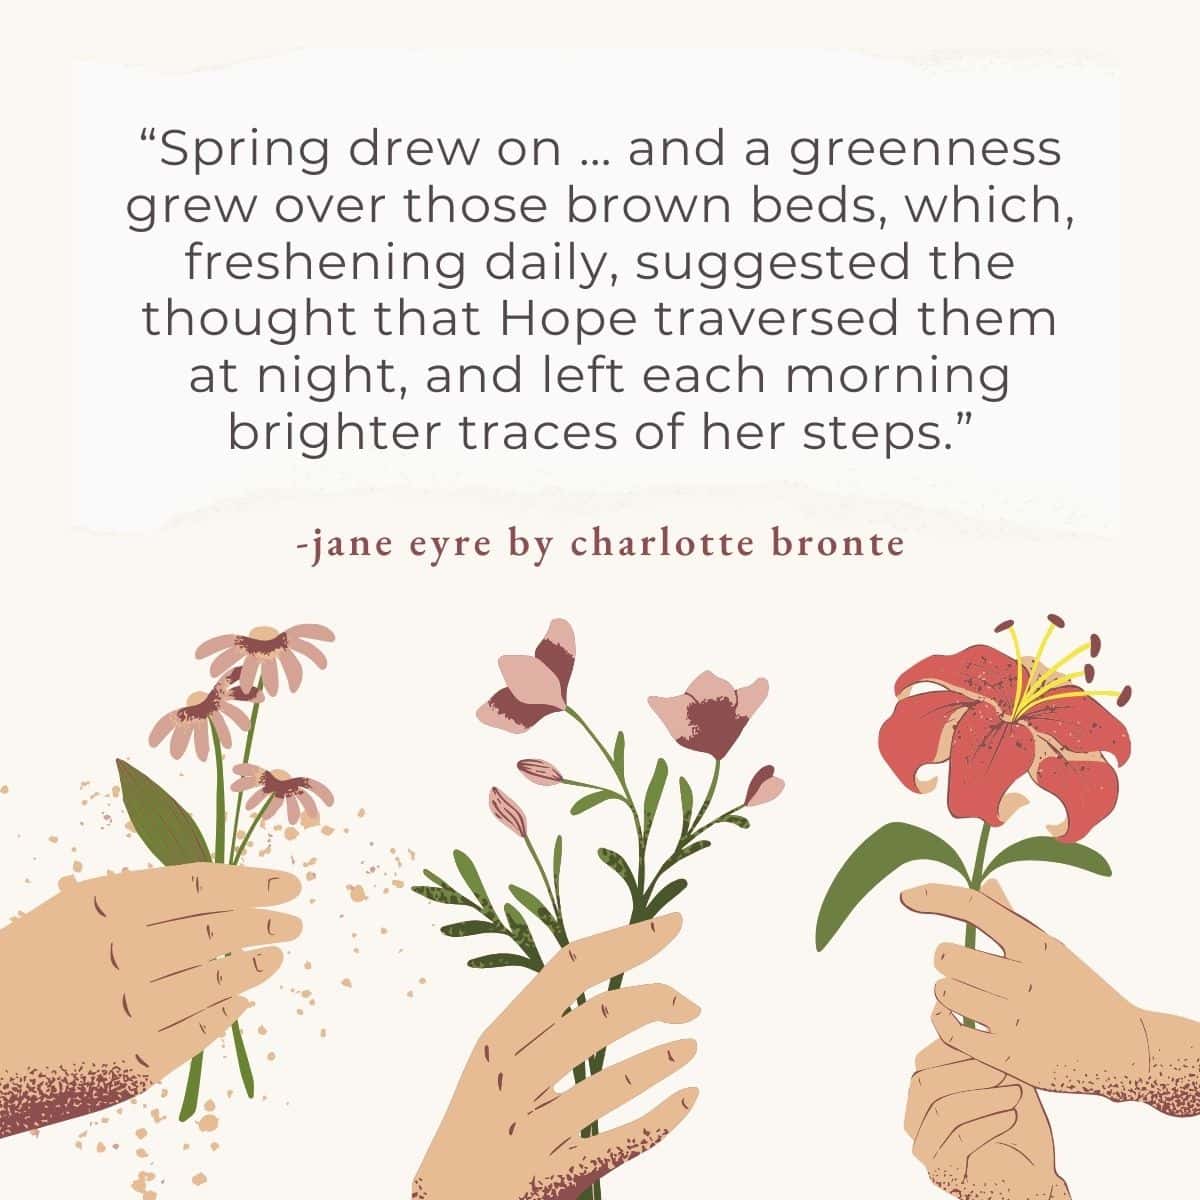 25 Literary Quotes About Spring by Famous Authors